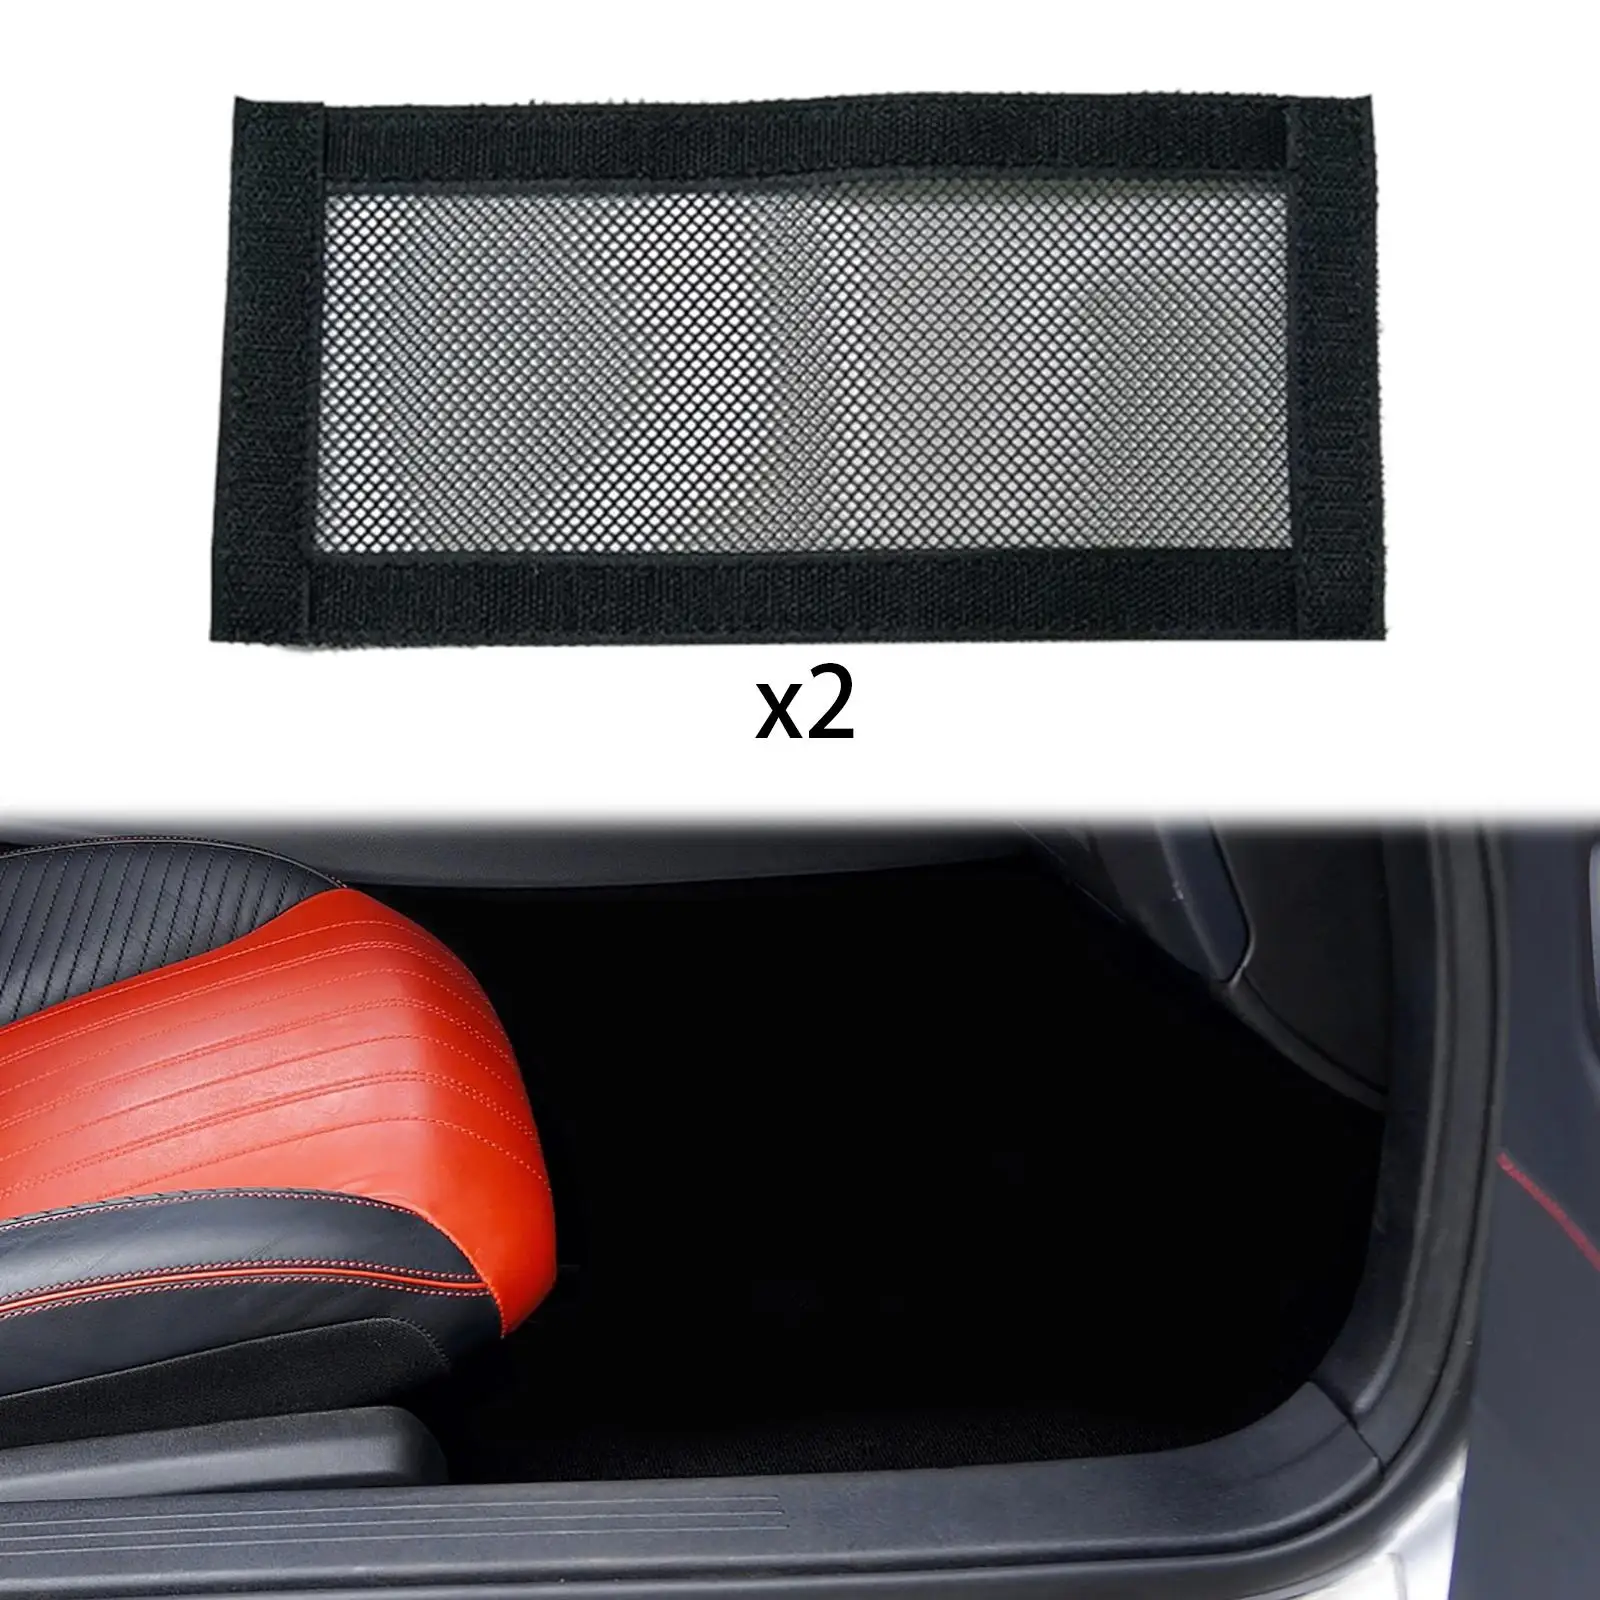 2 Pieces Automobile Air Conditioning Ports Cover Tesla Model 3 Model Y Seat Air Vent Decoration Accessories Car Air Outlet Cover